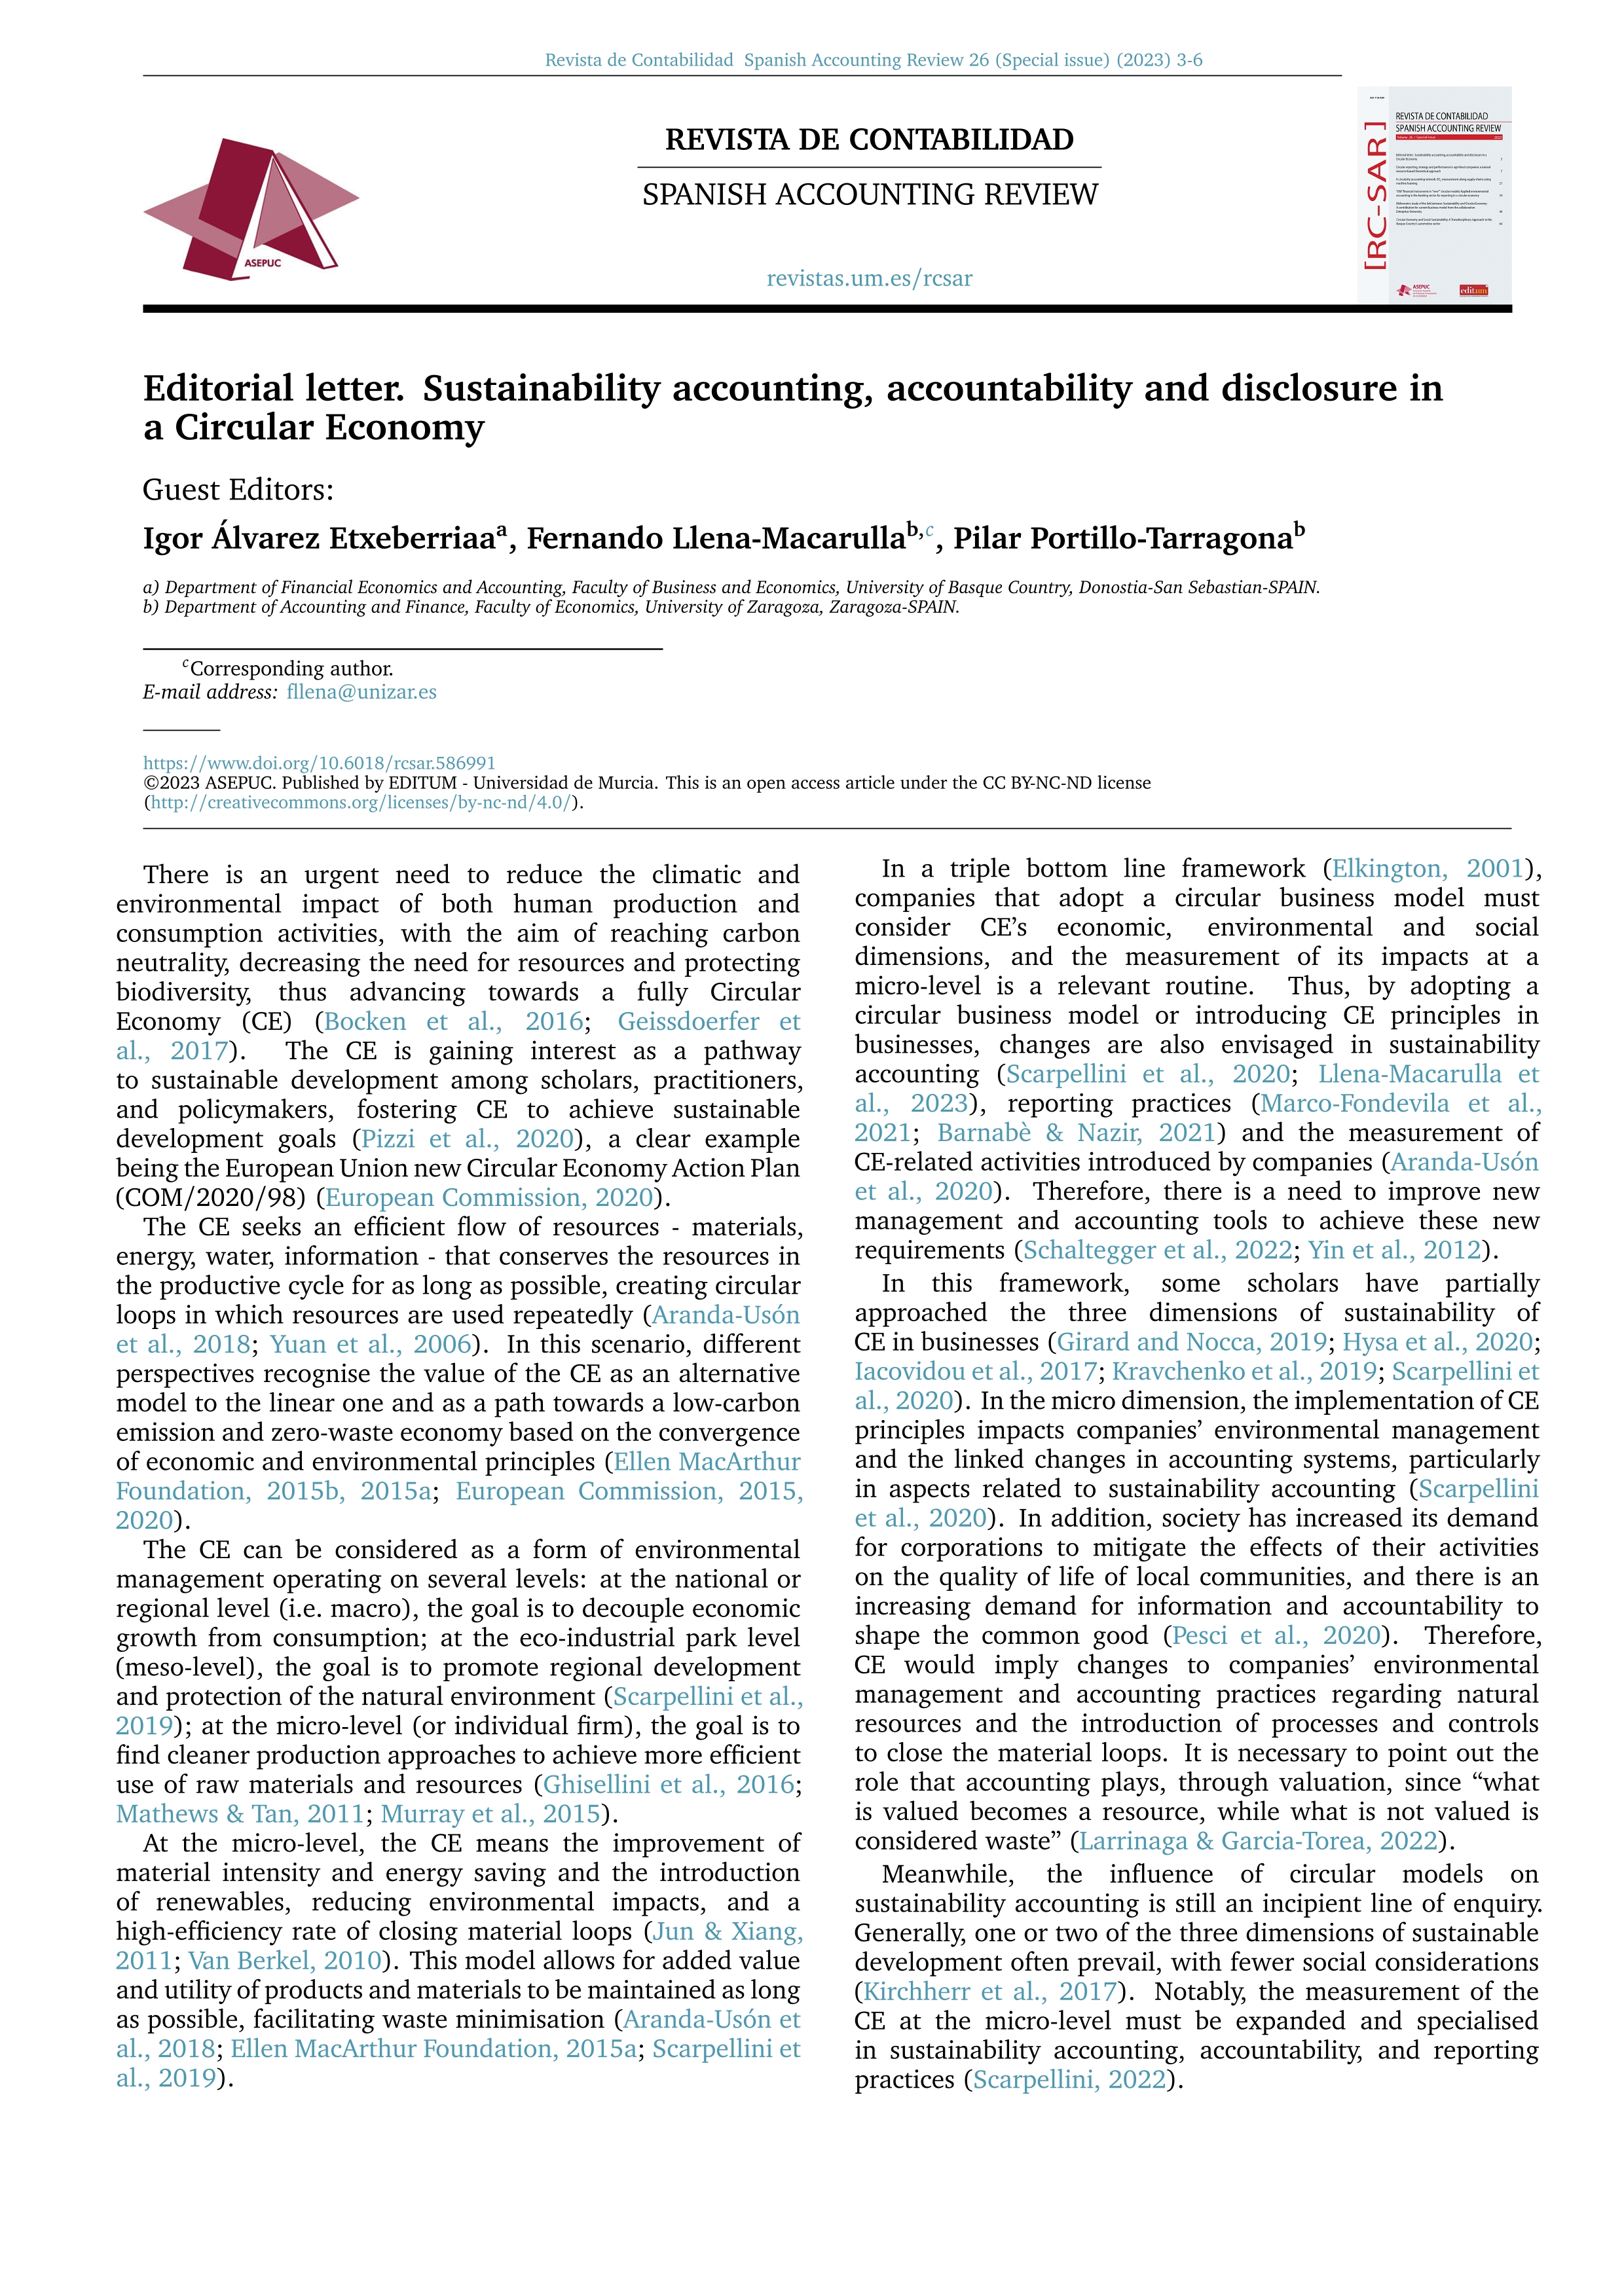 Editorial letter. Sustainability accounting, accountability and disclosure in a Circular Economy